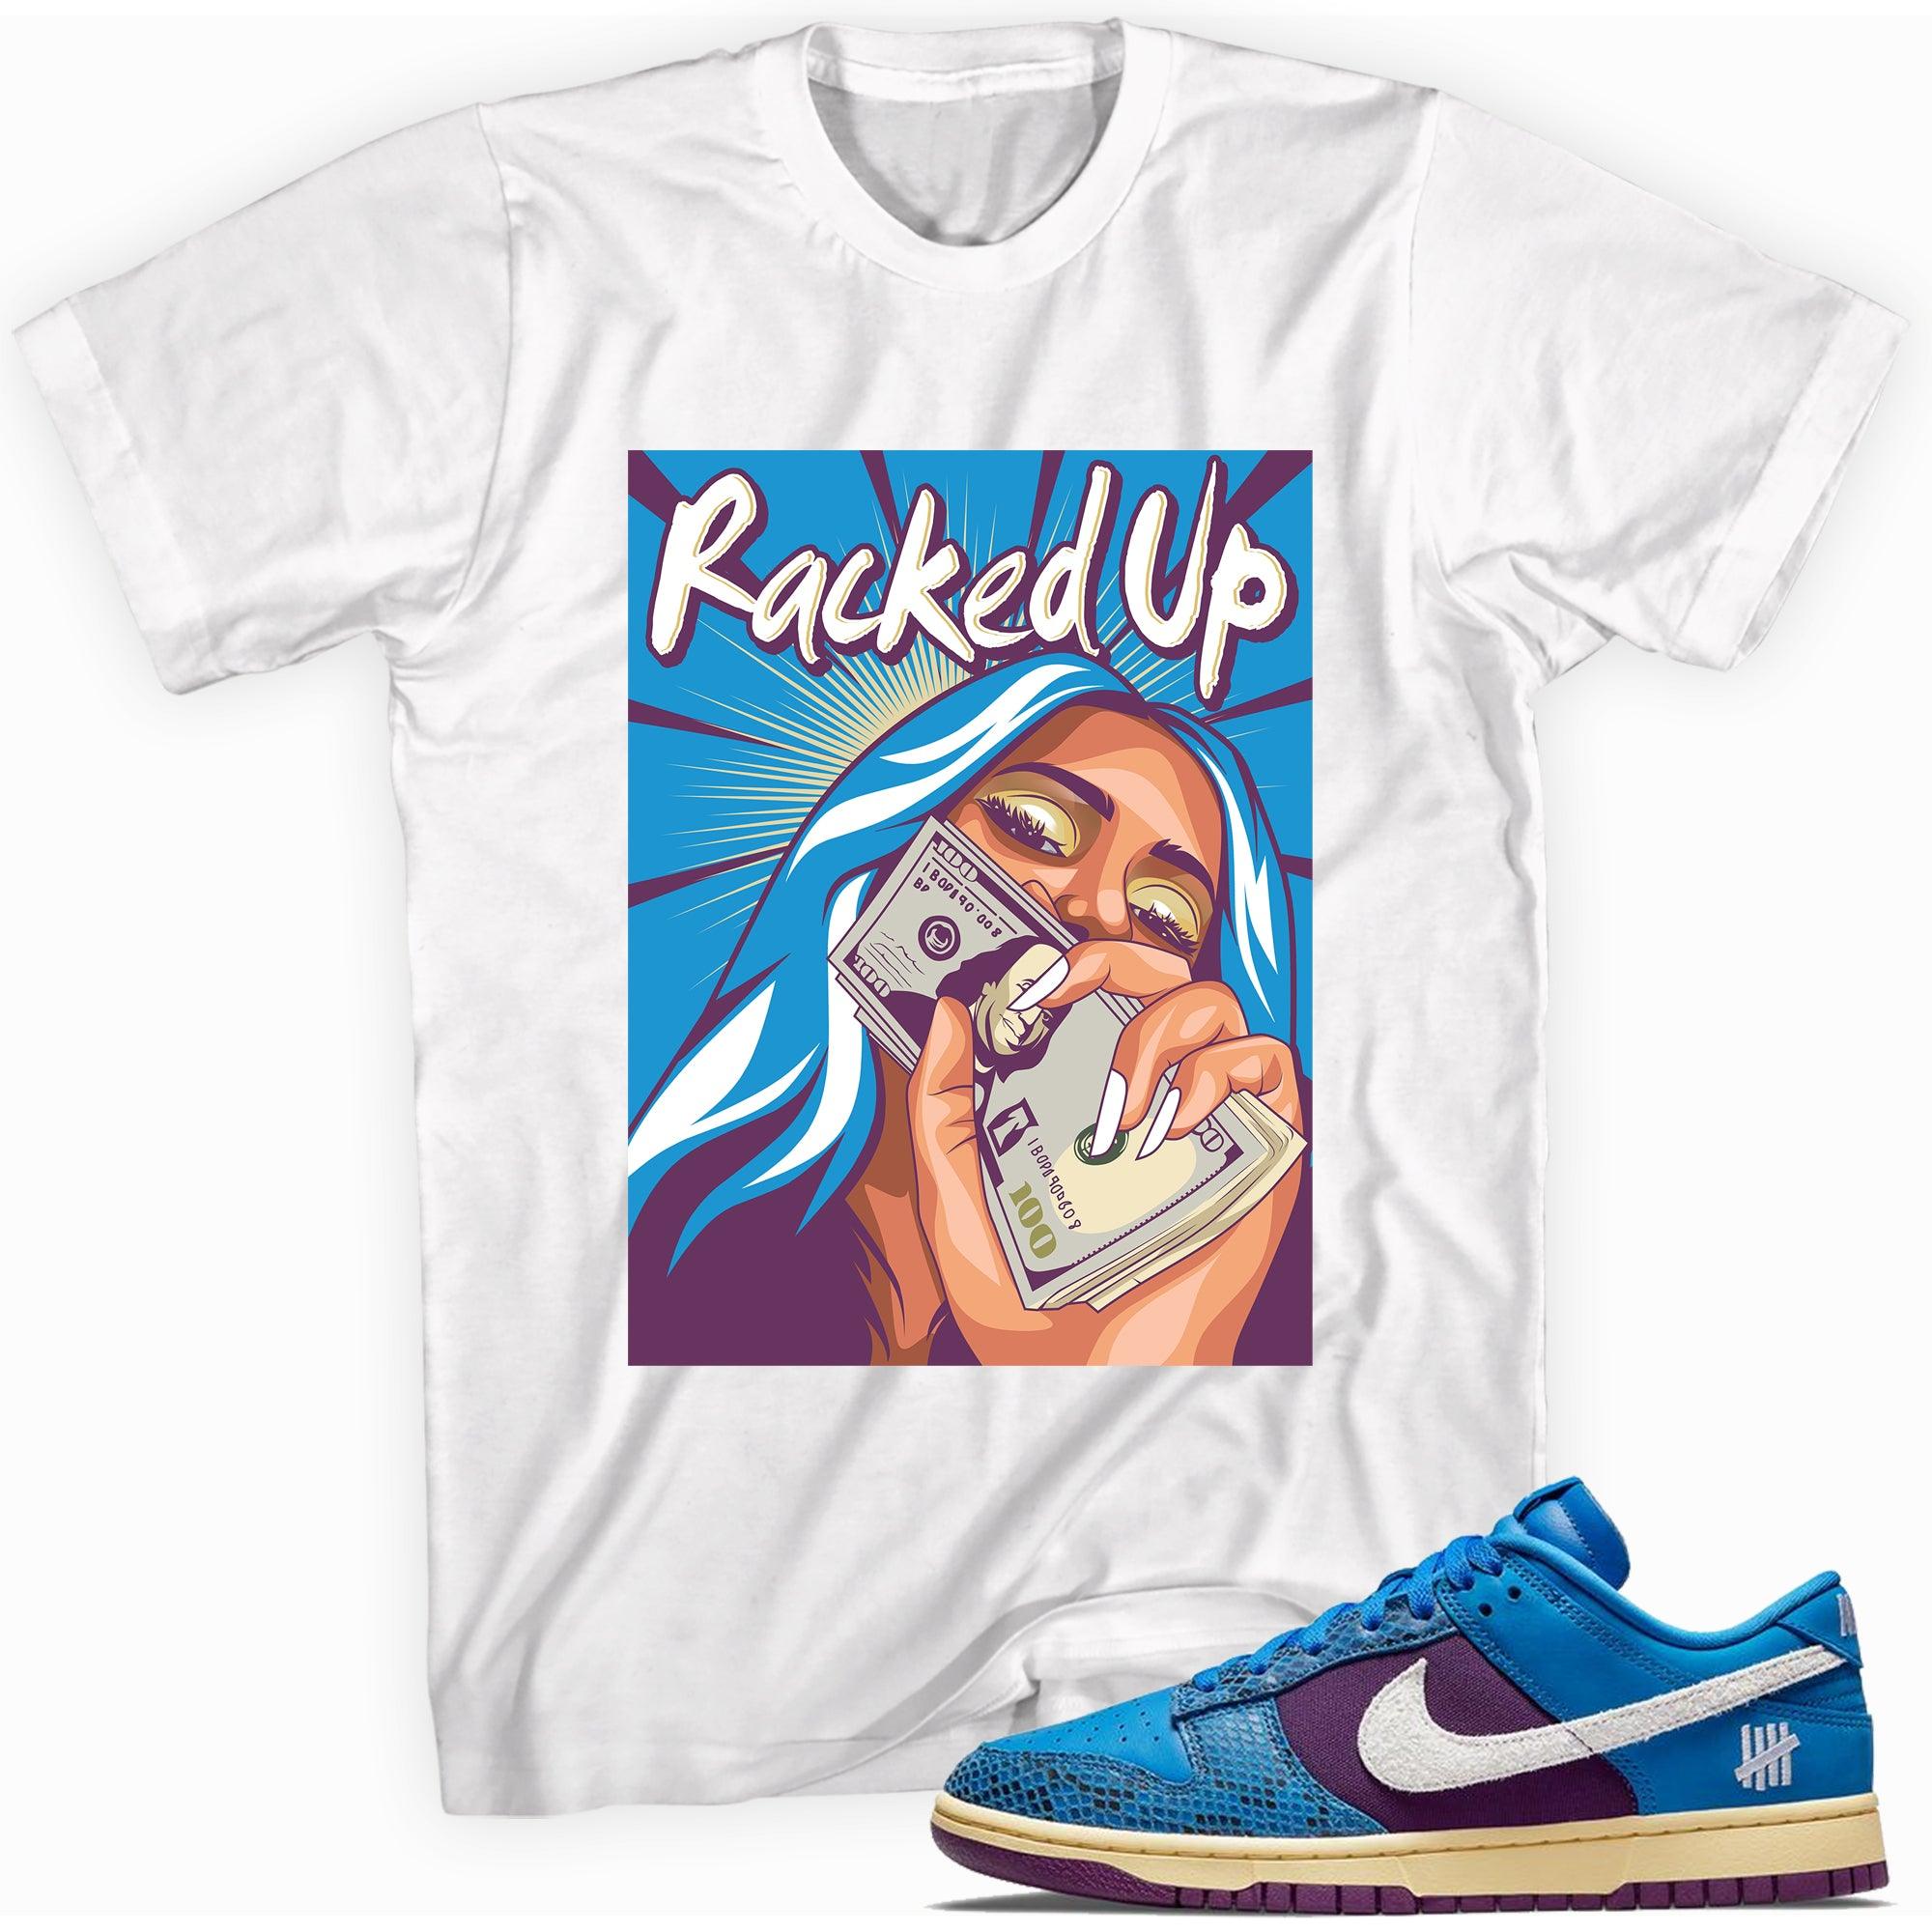 Racked Up Shirt Nike Dunk Low Undefeated 5 On It Dunk vs AF1 photo